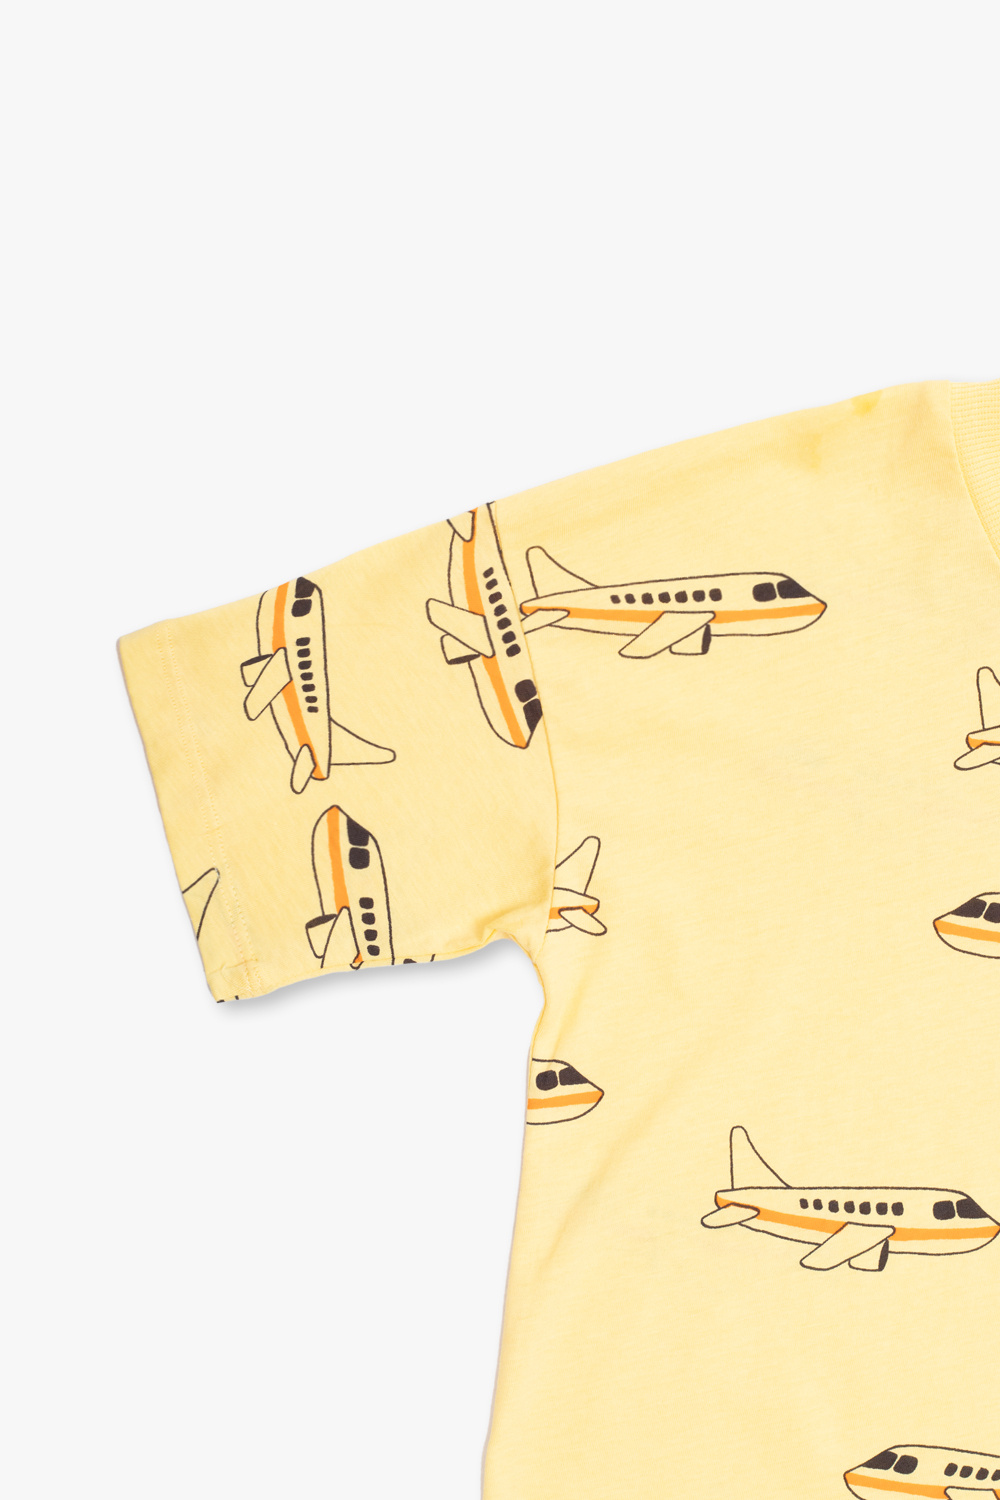 Mini Rodini T-shirt with motif of airplanes